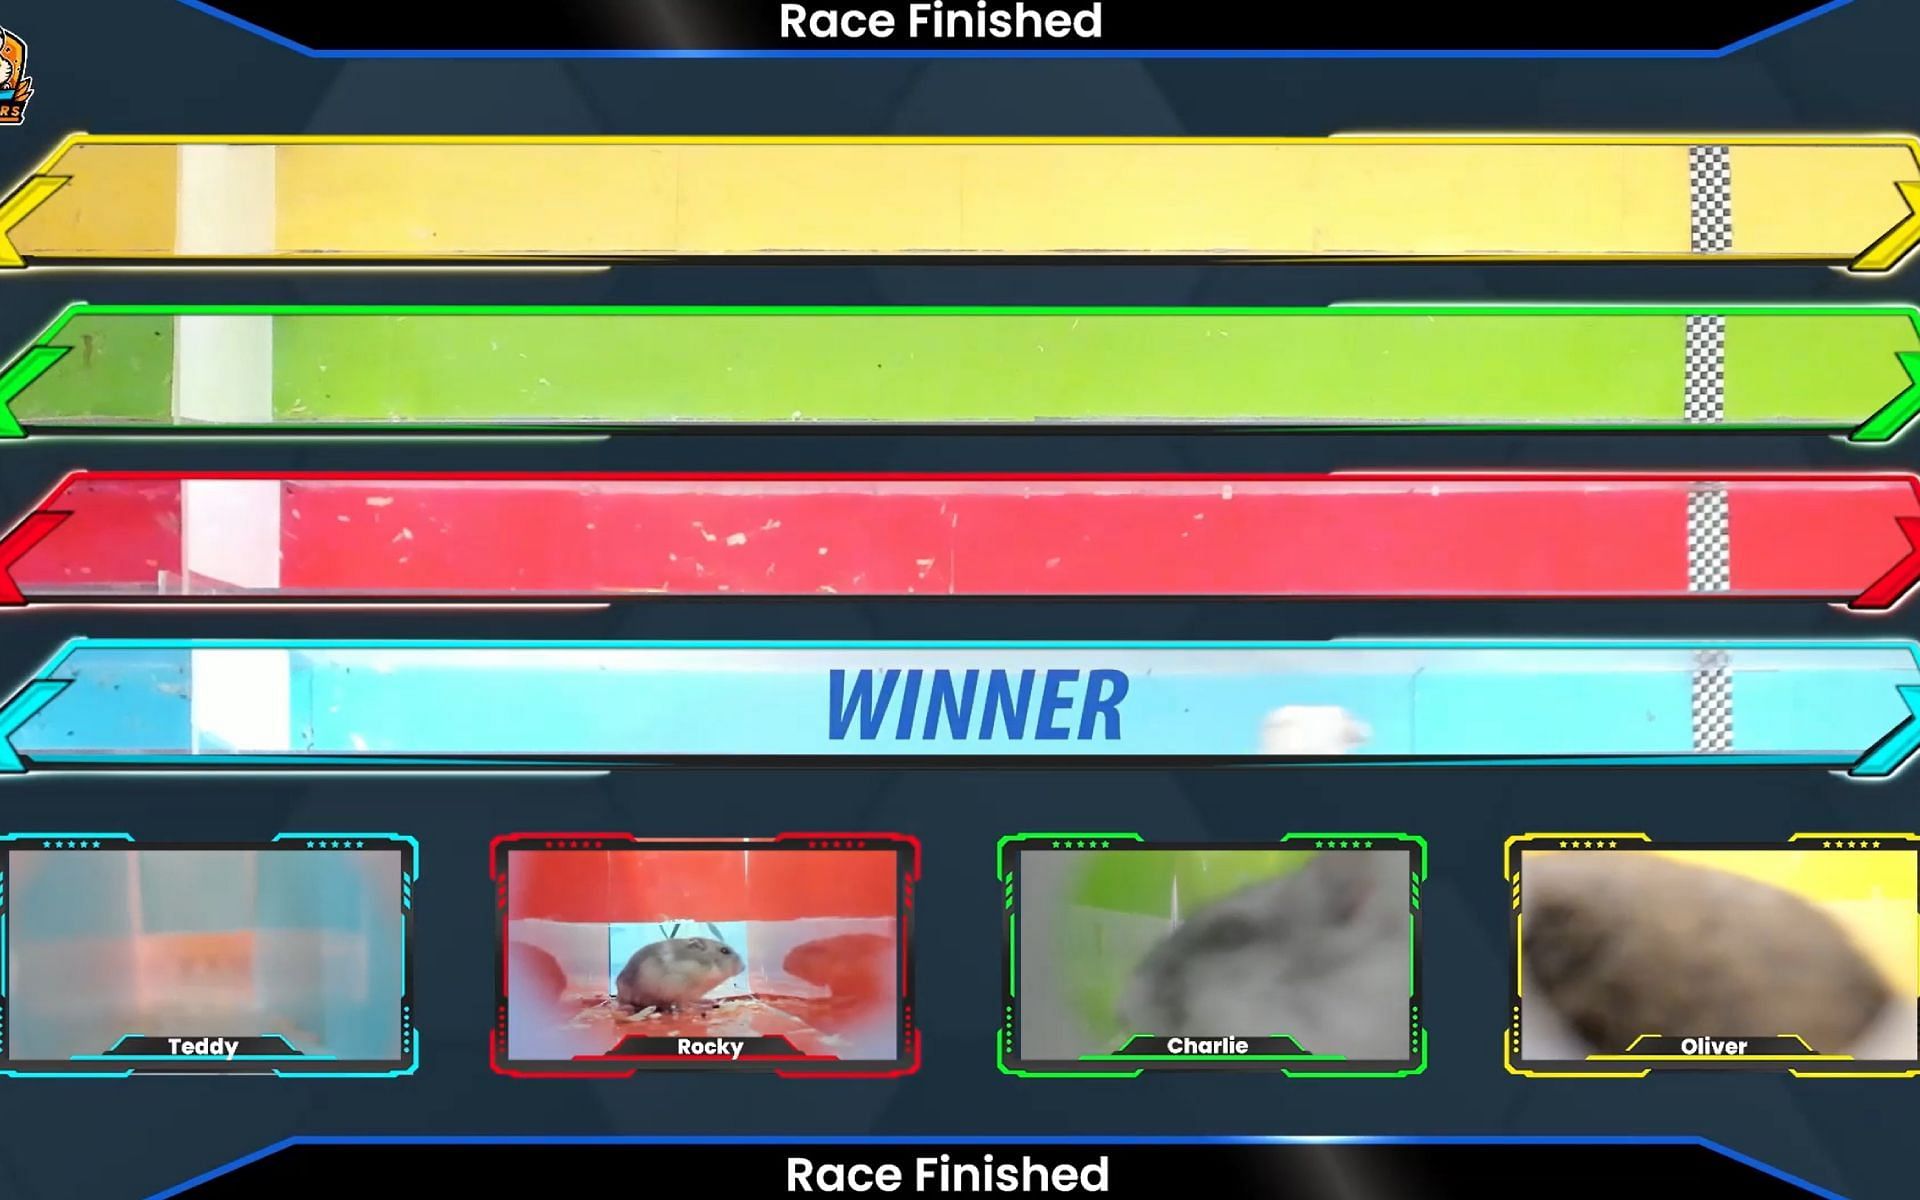 Exploring what hamster race betting livestreams on Twitch are (Image via hamstersgg/Twitch)